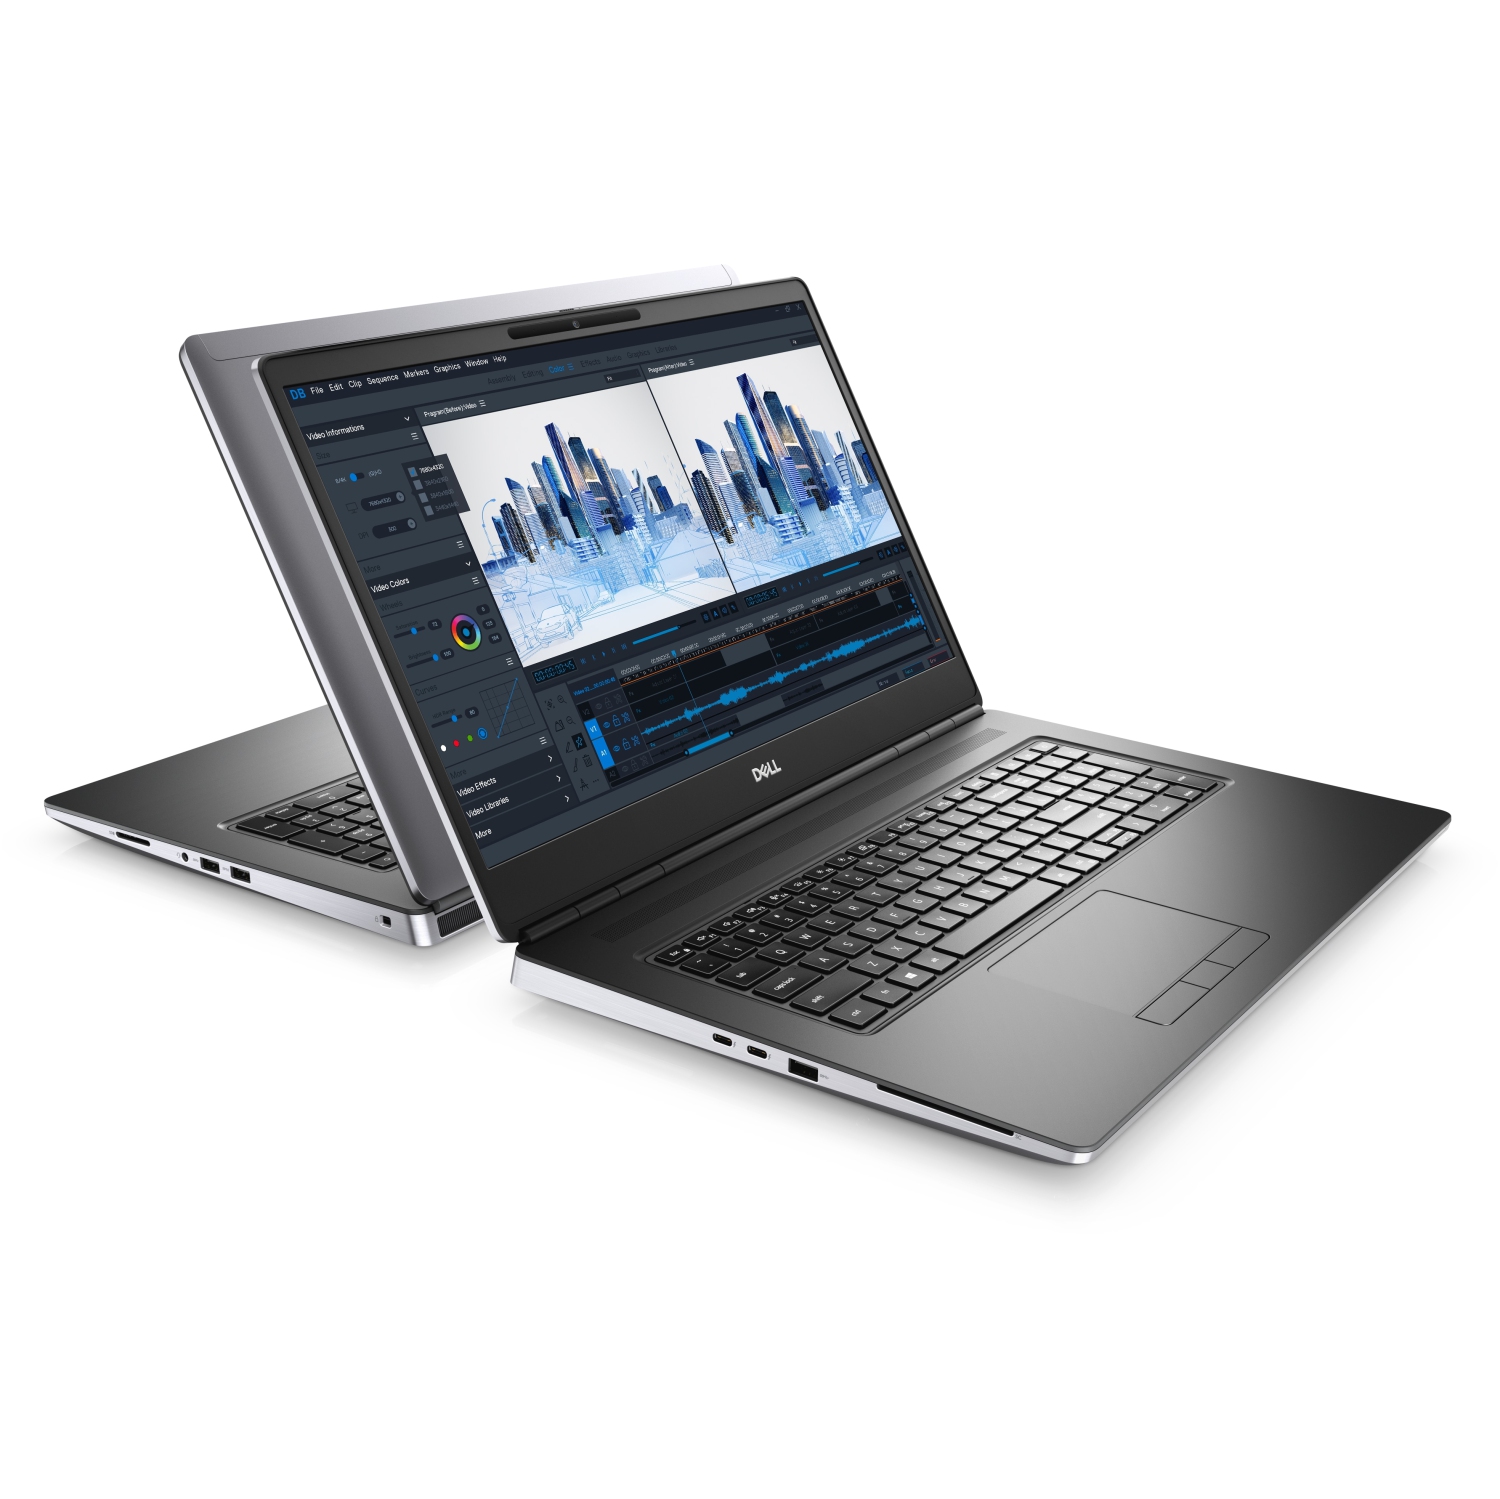 Refurbished (Excellent) - Dell Precision 7000 7760 Workstation Laptop (2021), 17.3" FHD, Core i9, 1TB SSD, 64GB RAM, RTX A5000, 8 Cores @ 5 GHz, 11th Gen CPU Certified